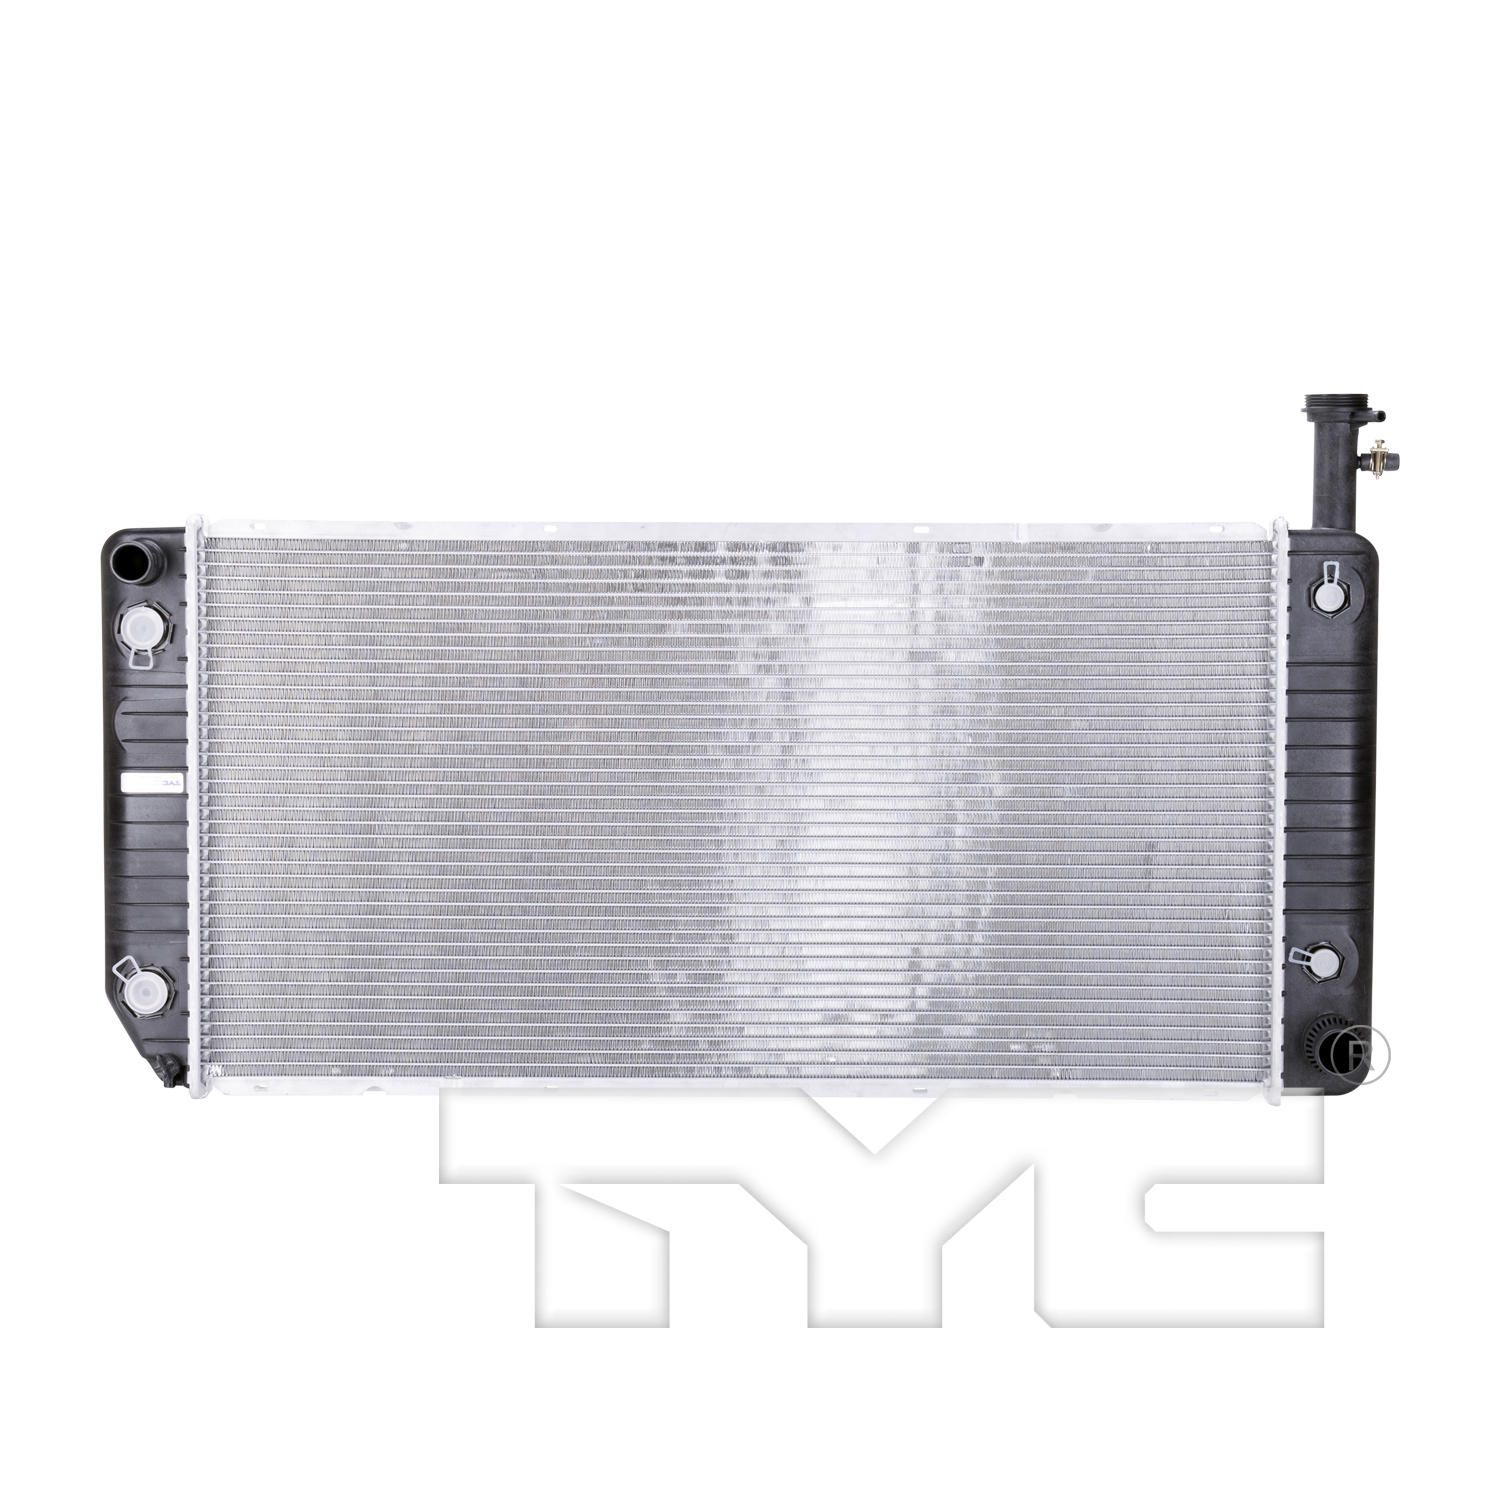 Aftermarket RADIATORS for CHEVROLET - EXPRESS 3500, EXPRESS 3500,05-08,Radiator assembly